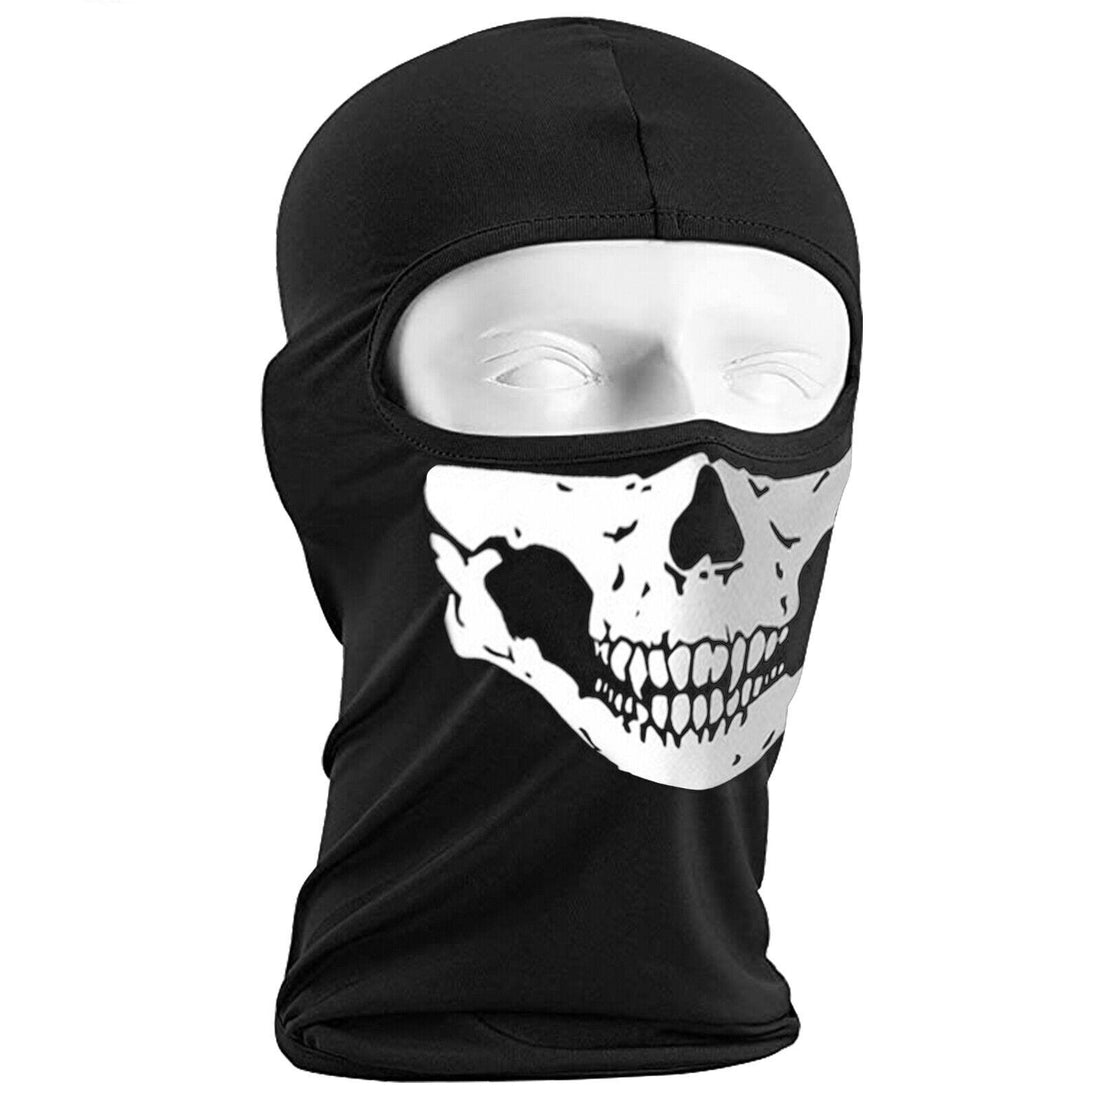 Balaclava Face Mask Men -Knit Beanie Ski Masks Neck Gaiter with Ears Covers  for Running Outdoor, Mens Winter Hats for The Cold, Thermal Womens Adult